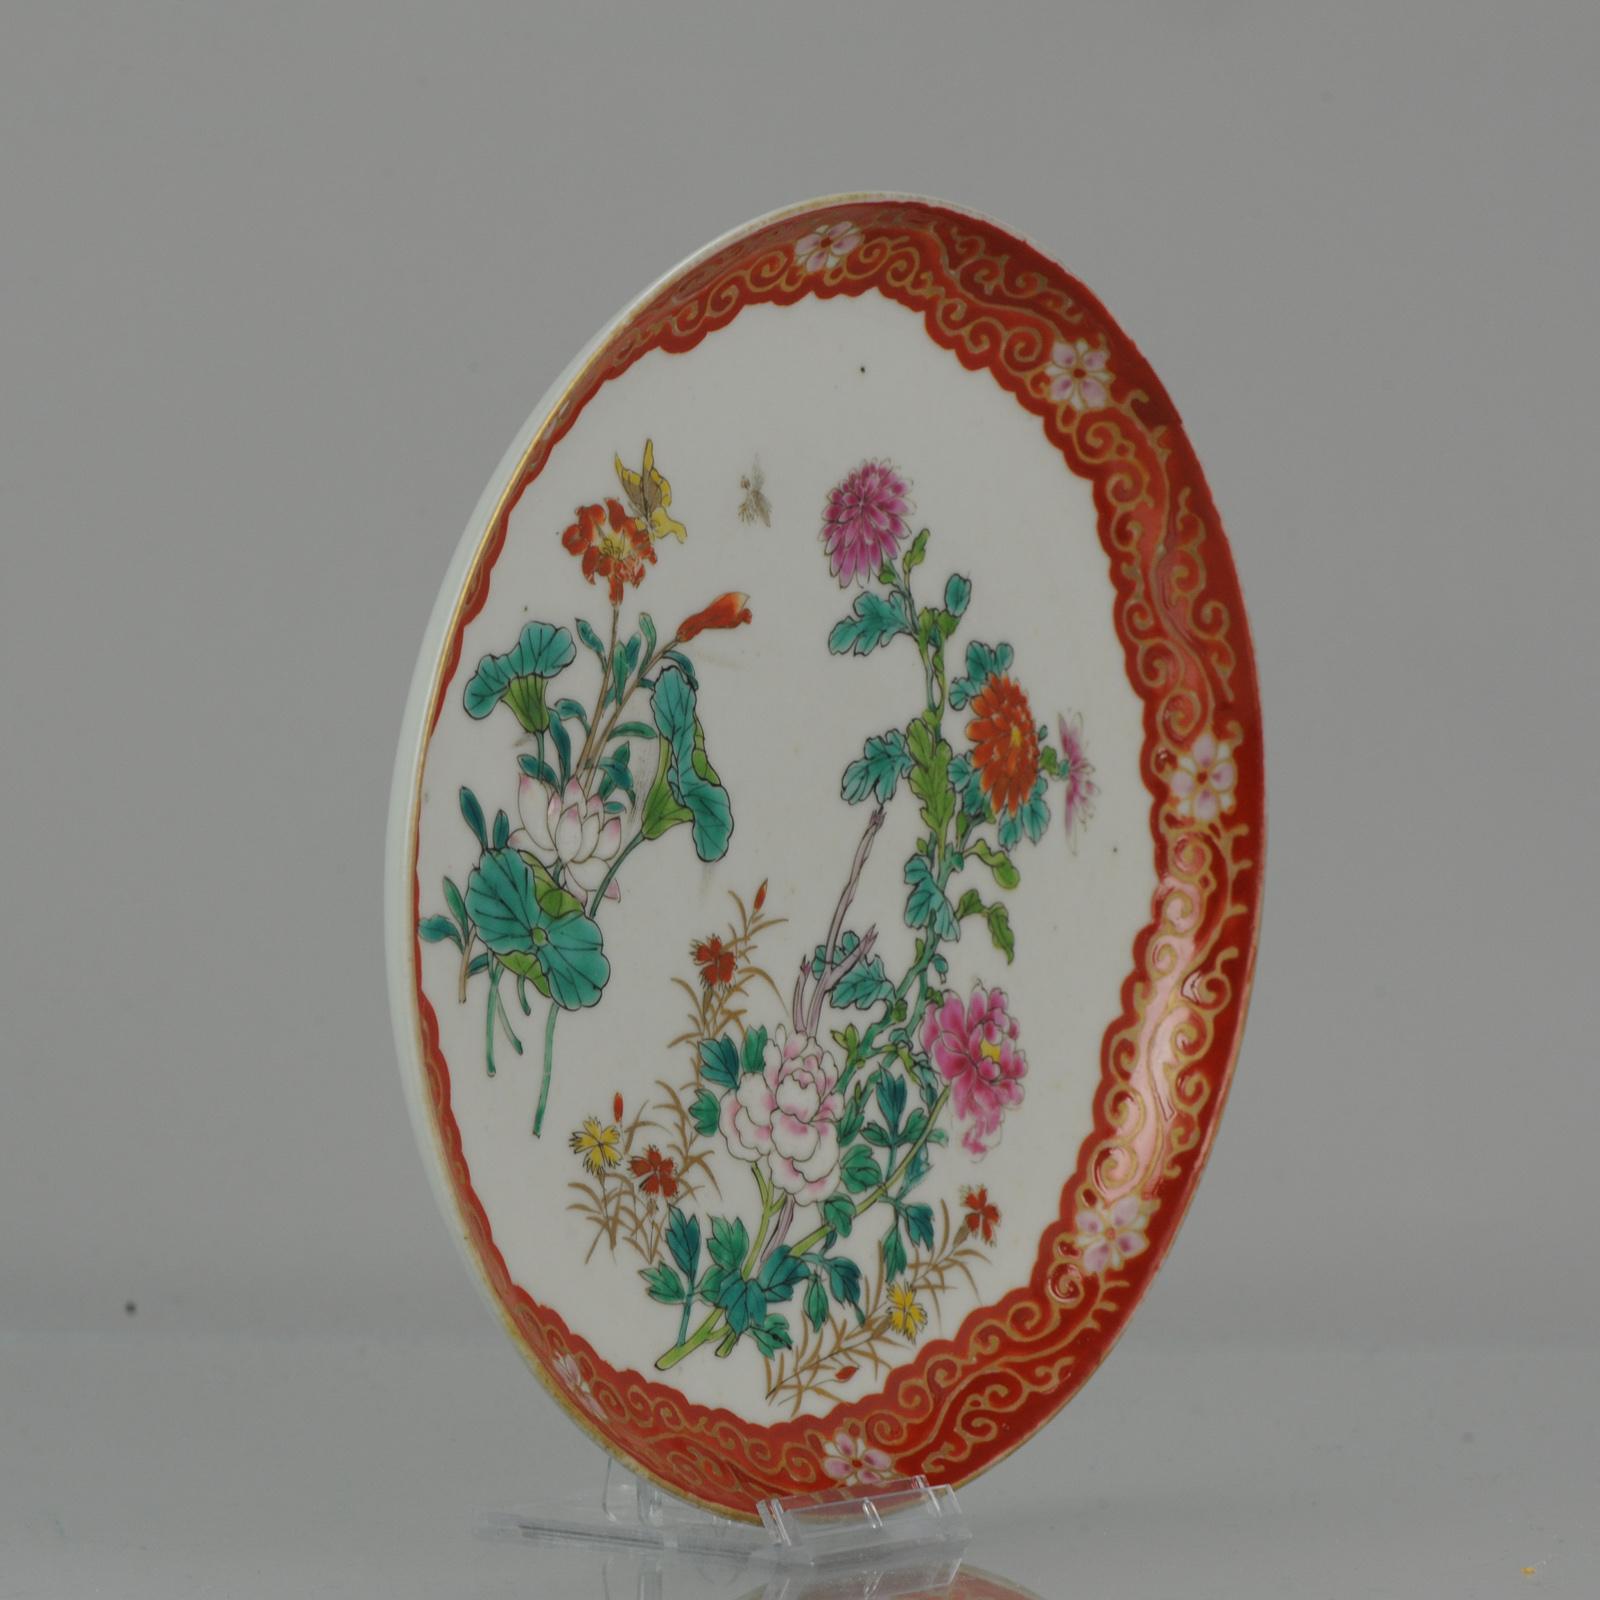 A very nicely decorated Japanese Porcelain dish in polychrome colors.

Marked at base with a 6 character overglaze mark, Hichozan Shinpo Zo.

The central scene is of a busy flower landscape with butterflies flying around. The rim nice copper red